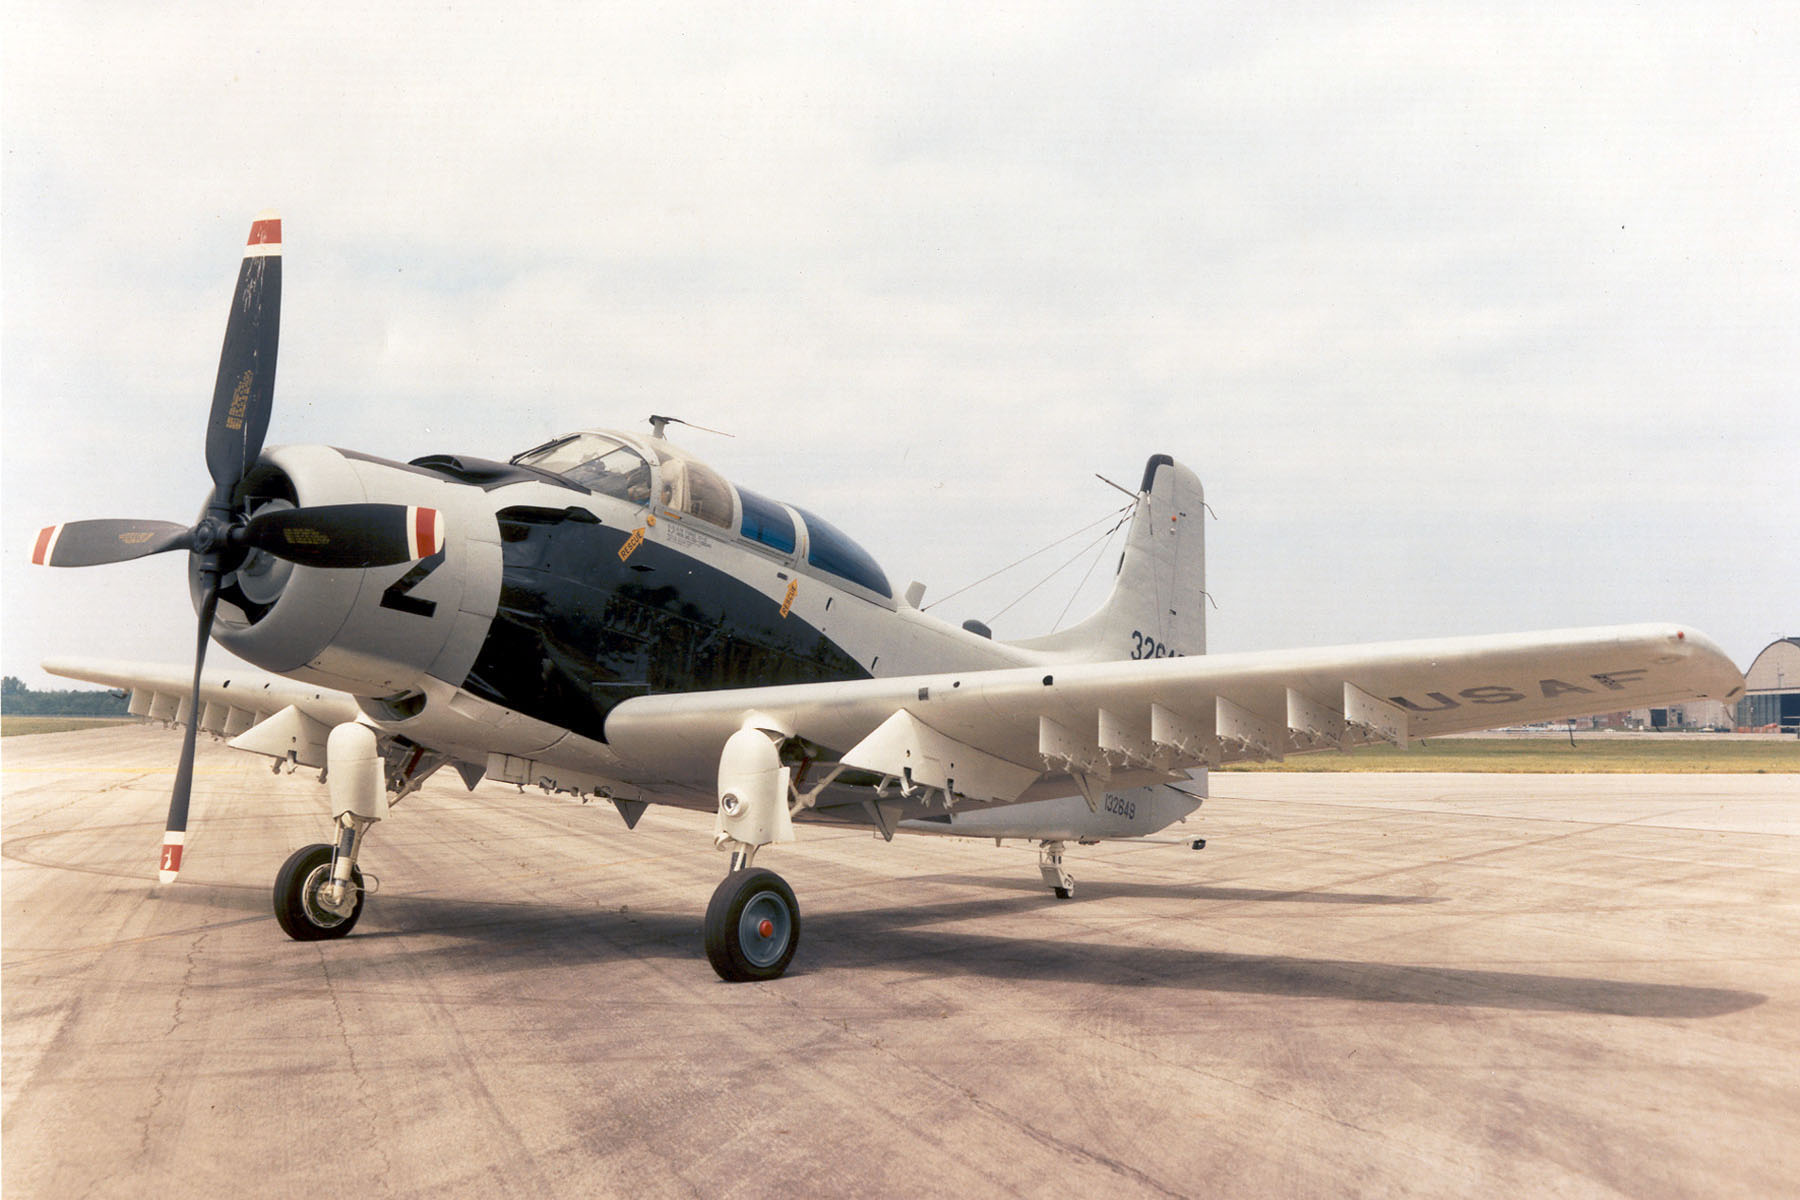 This Douglas A-1E Skyraider, 52-132649, was transferred from the U.S. Navy to the U.S. Air Force in 1952. In 1966, it was flown by Major Bernard Fisher when he rescued another pilot, an act of heroism for which Major Fisher was awarded the Medal of Honor. This Skyraider was restored by the National Museum of the United States Air Force and is in its permanent collection at Wright-Patterson AFB, Ohio. (U.S. Air Force)